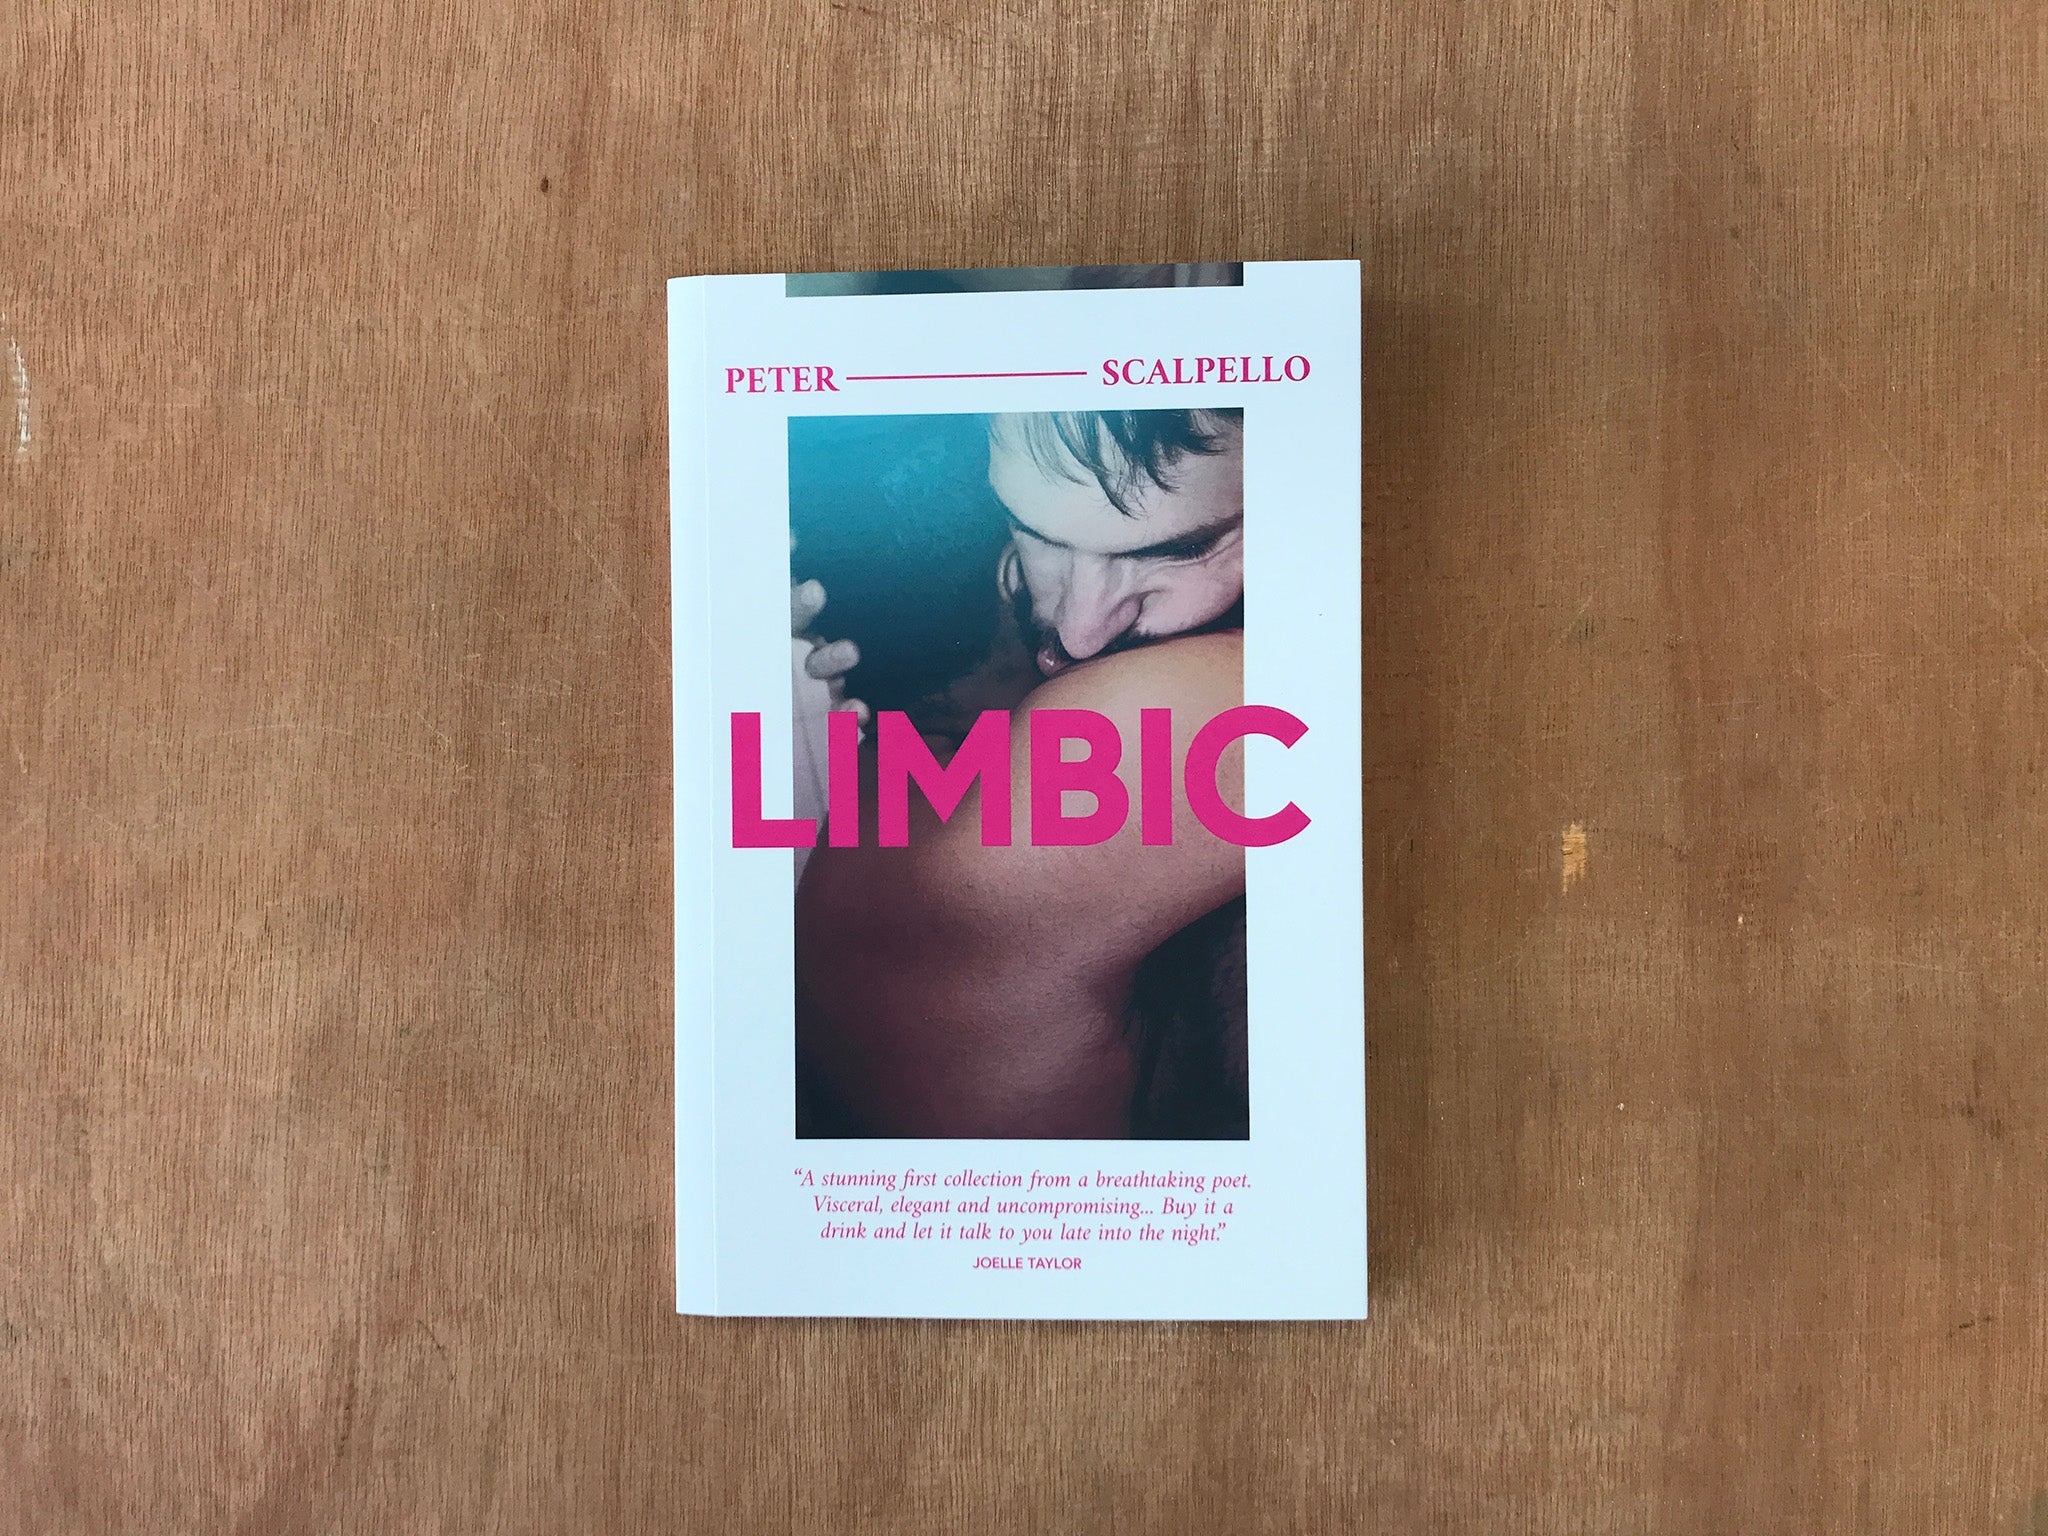 LIMBIC by Peter Scalpello